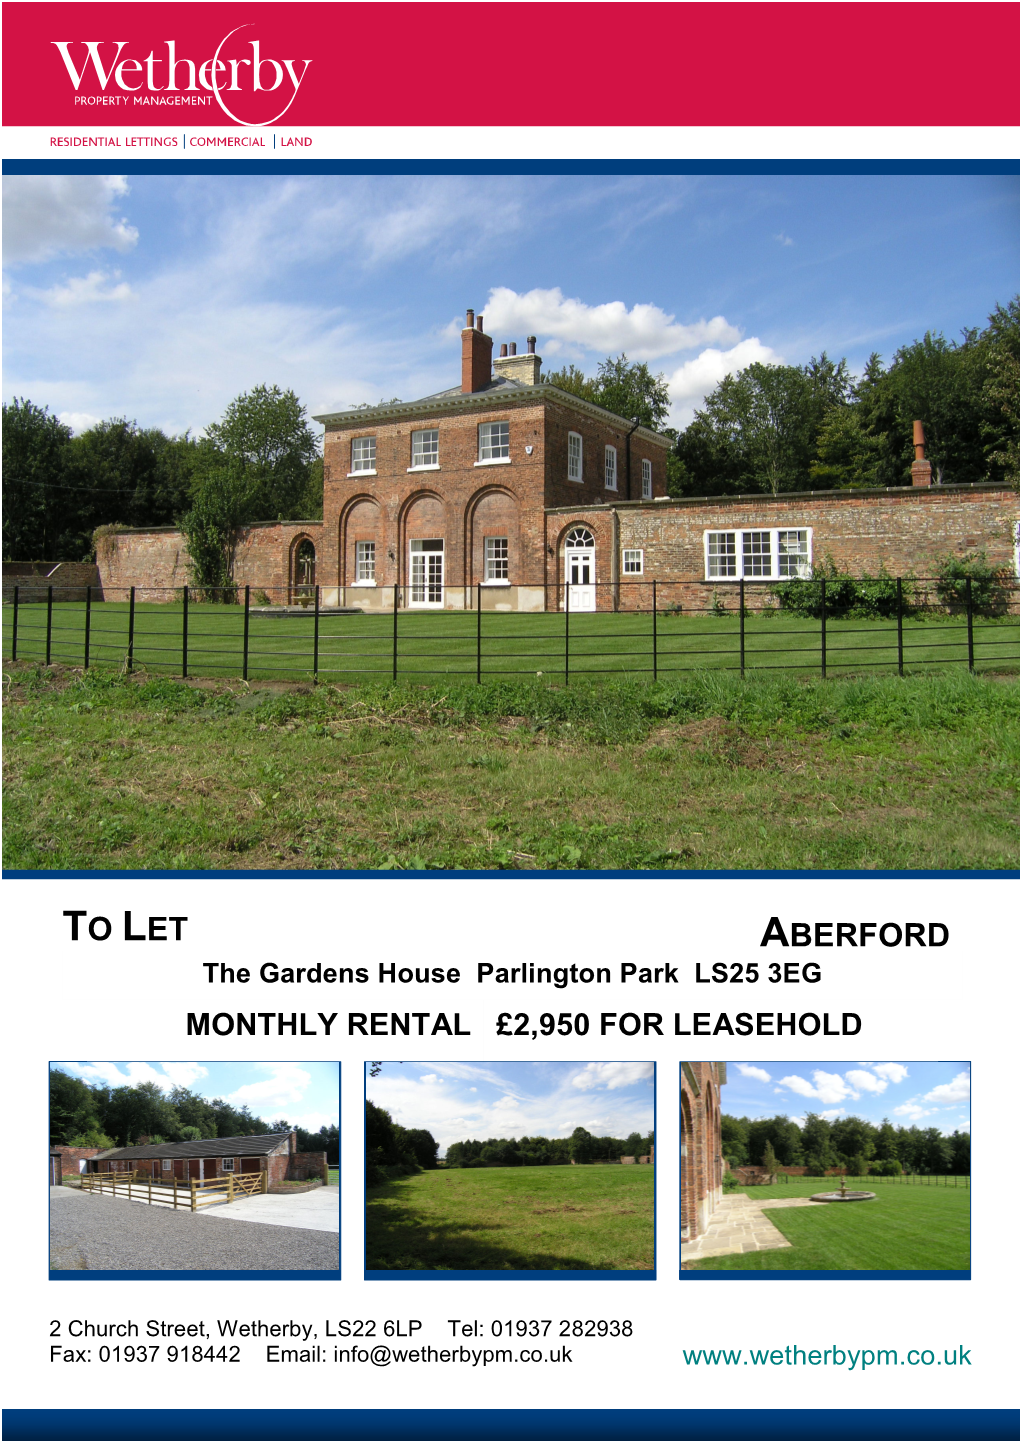 TO LET ABERFORD the Gardens House Parlington Park LS25 3EG MONTHLY RENTAL £2,950 for LEASEHOLD